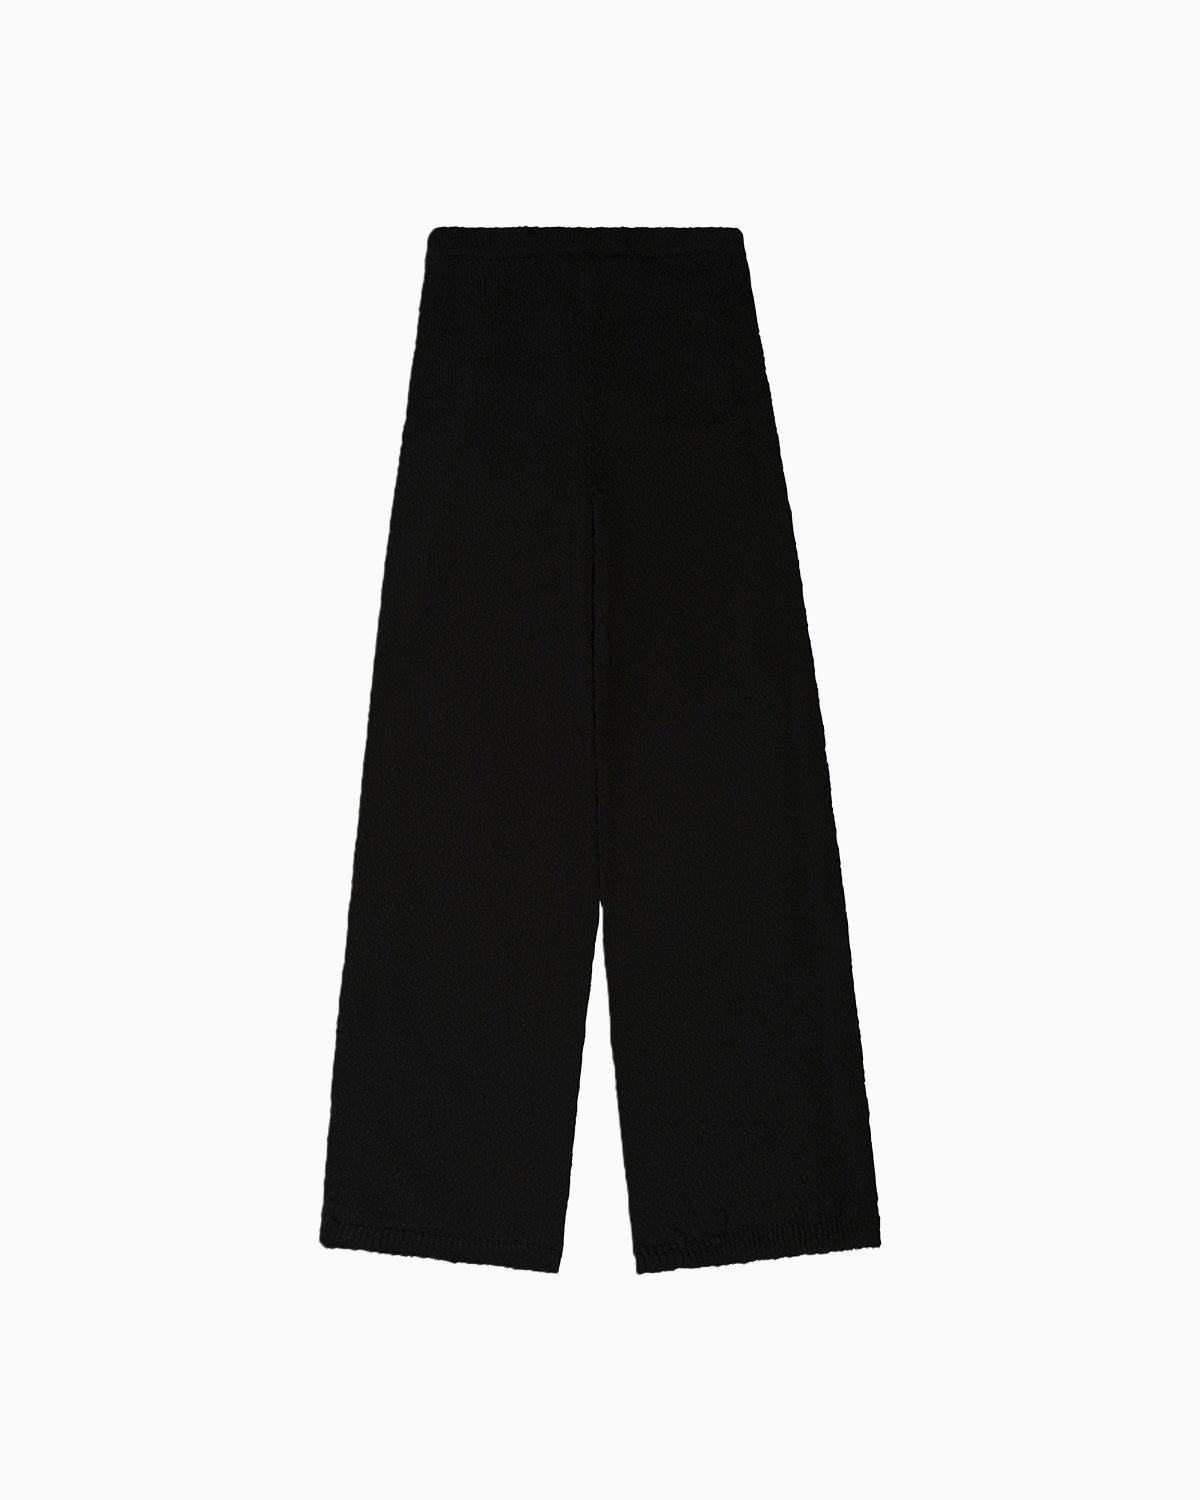 Back View of Andy Fringe Knit Pants in Black by Aseye Studio